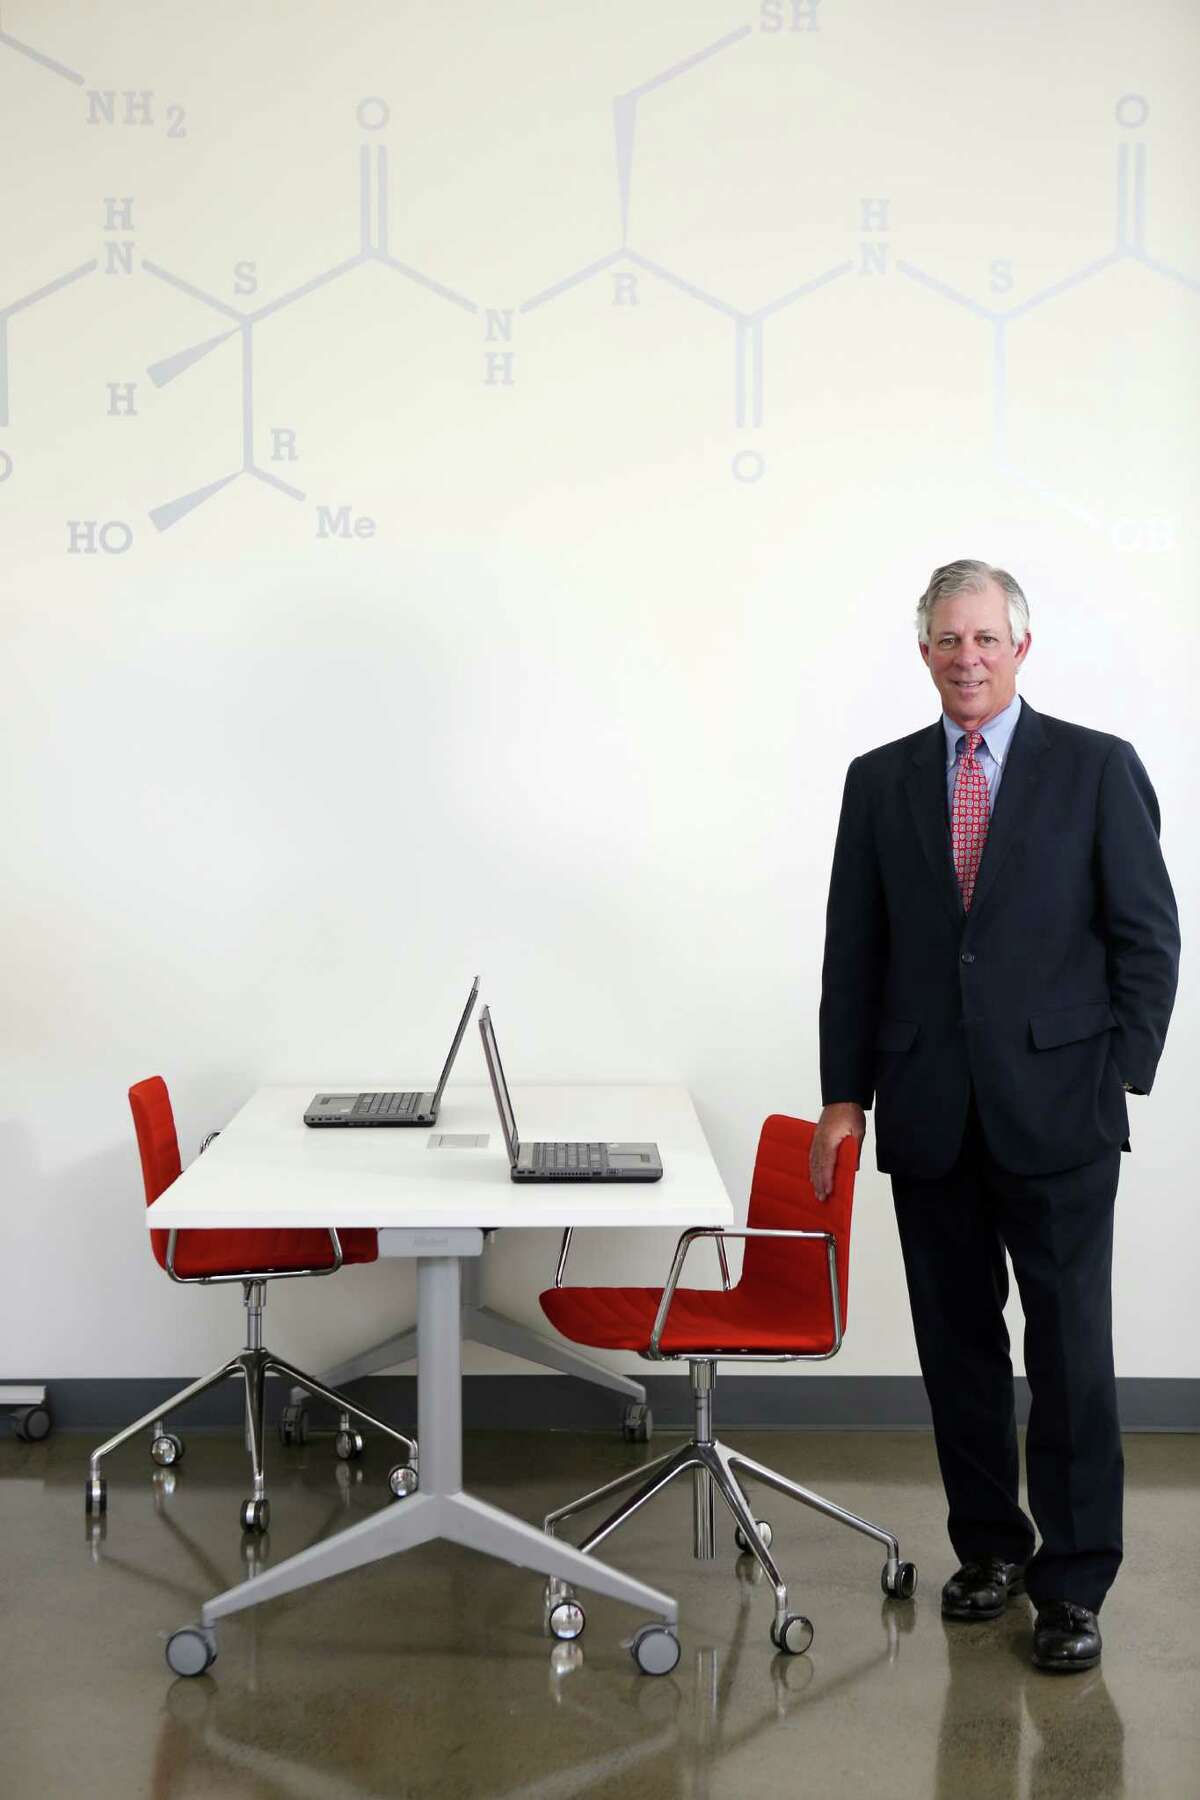 Dr. Robert Robbins, the Texas Medical Center President and CEO, stands in the new TMC incubator on Tuesday, Oct. 7, 2014, in Houston. The business incubator is being developed to bring in more health care-related startups to the Houston area. ( Mayra Beltran / Houston Chronicle )